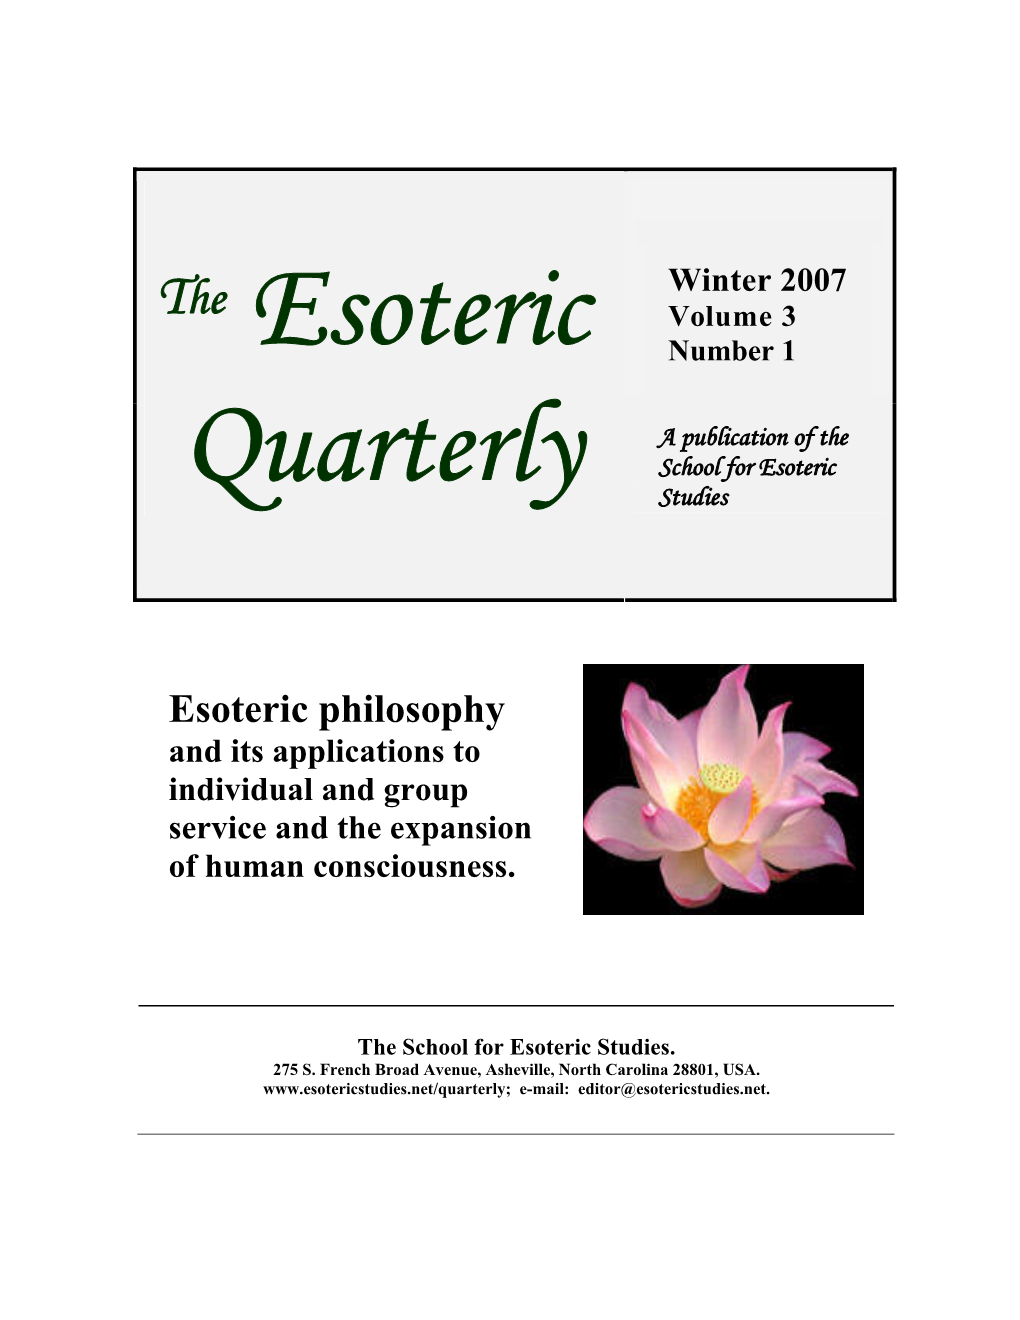 Esoteric Philosophy and Its Applications to Individual and Group Service and the Expansion of Human Consciousness